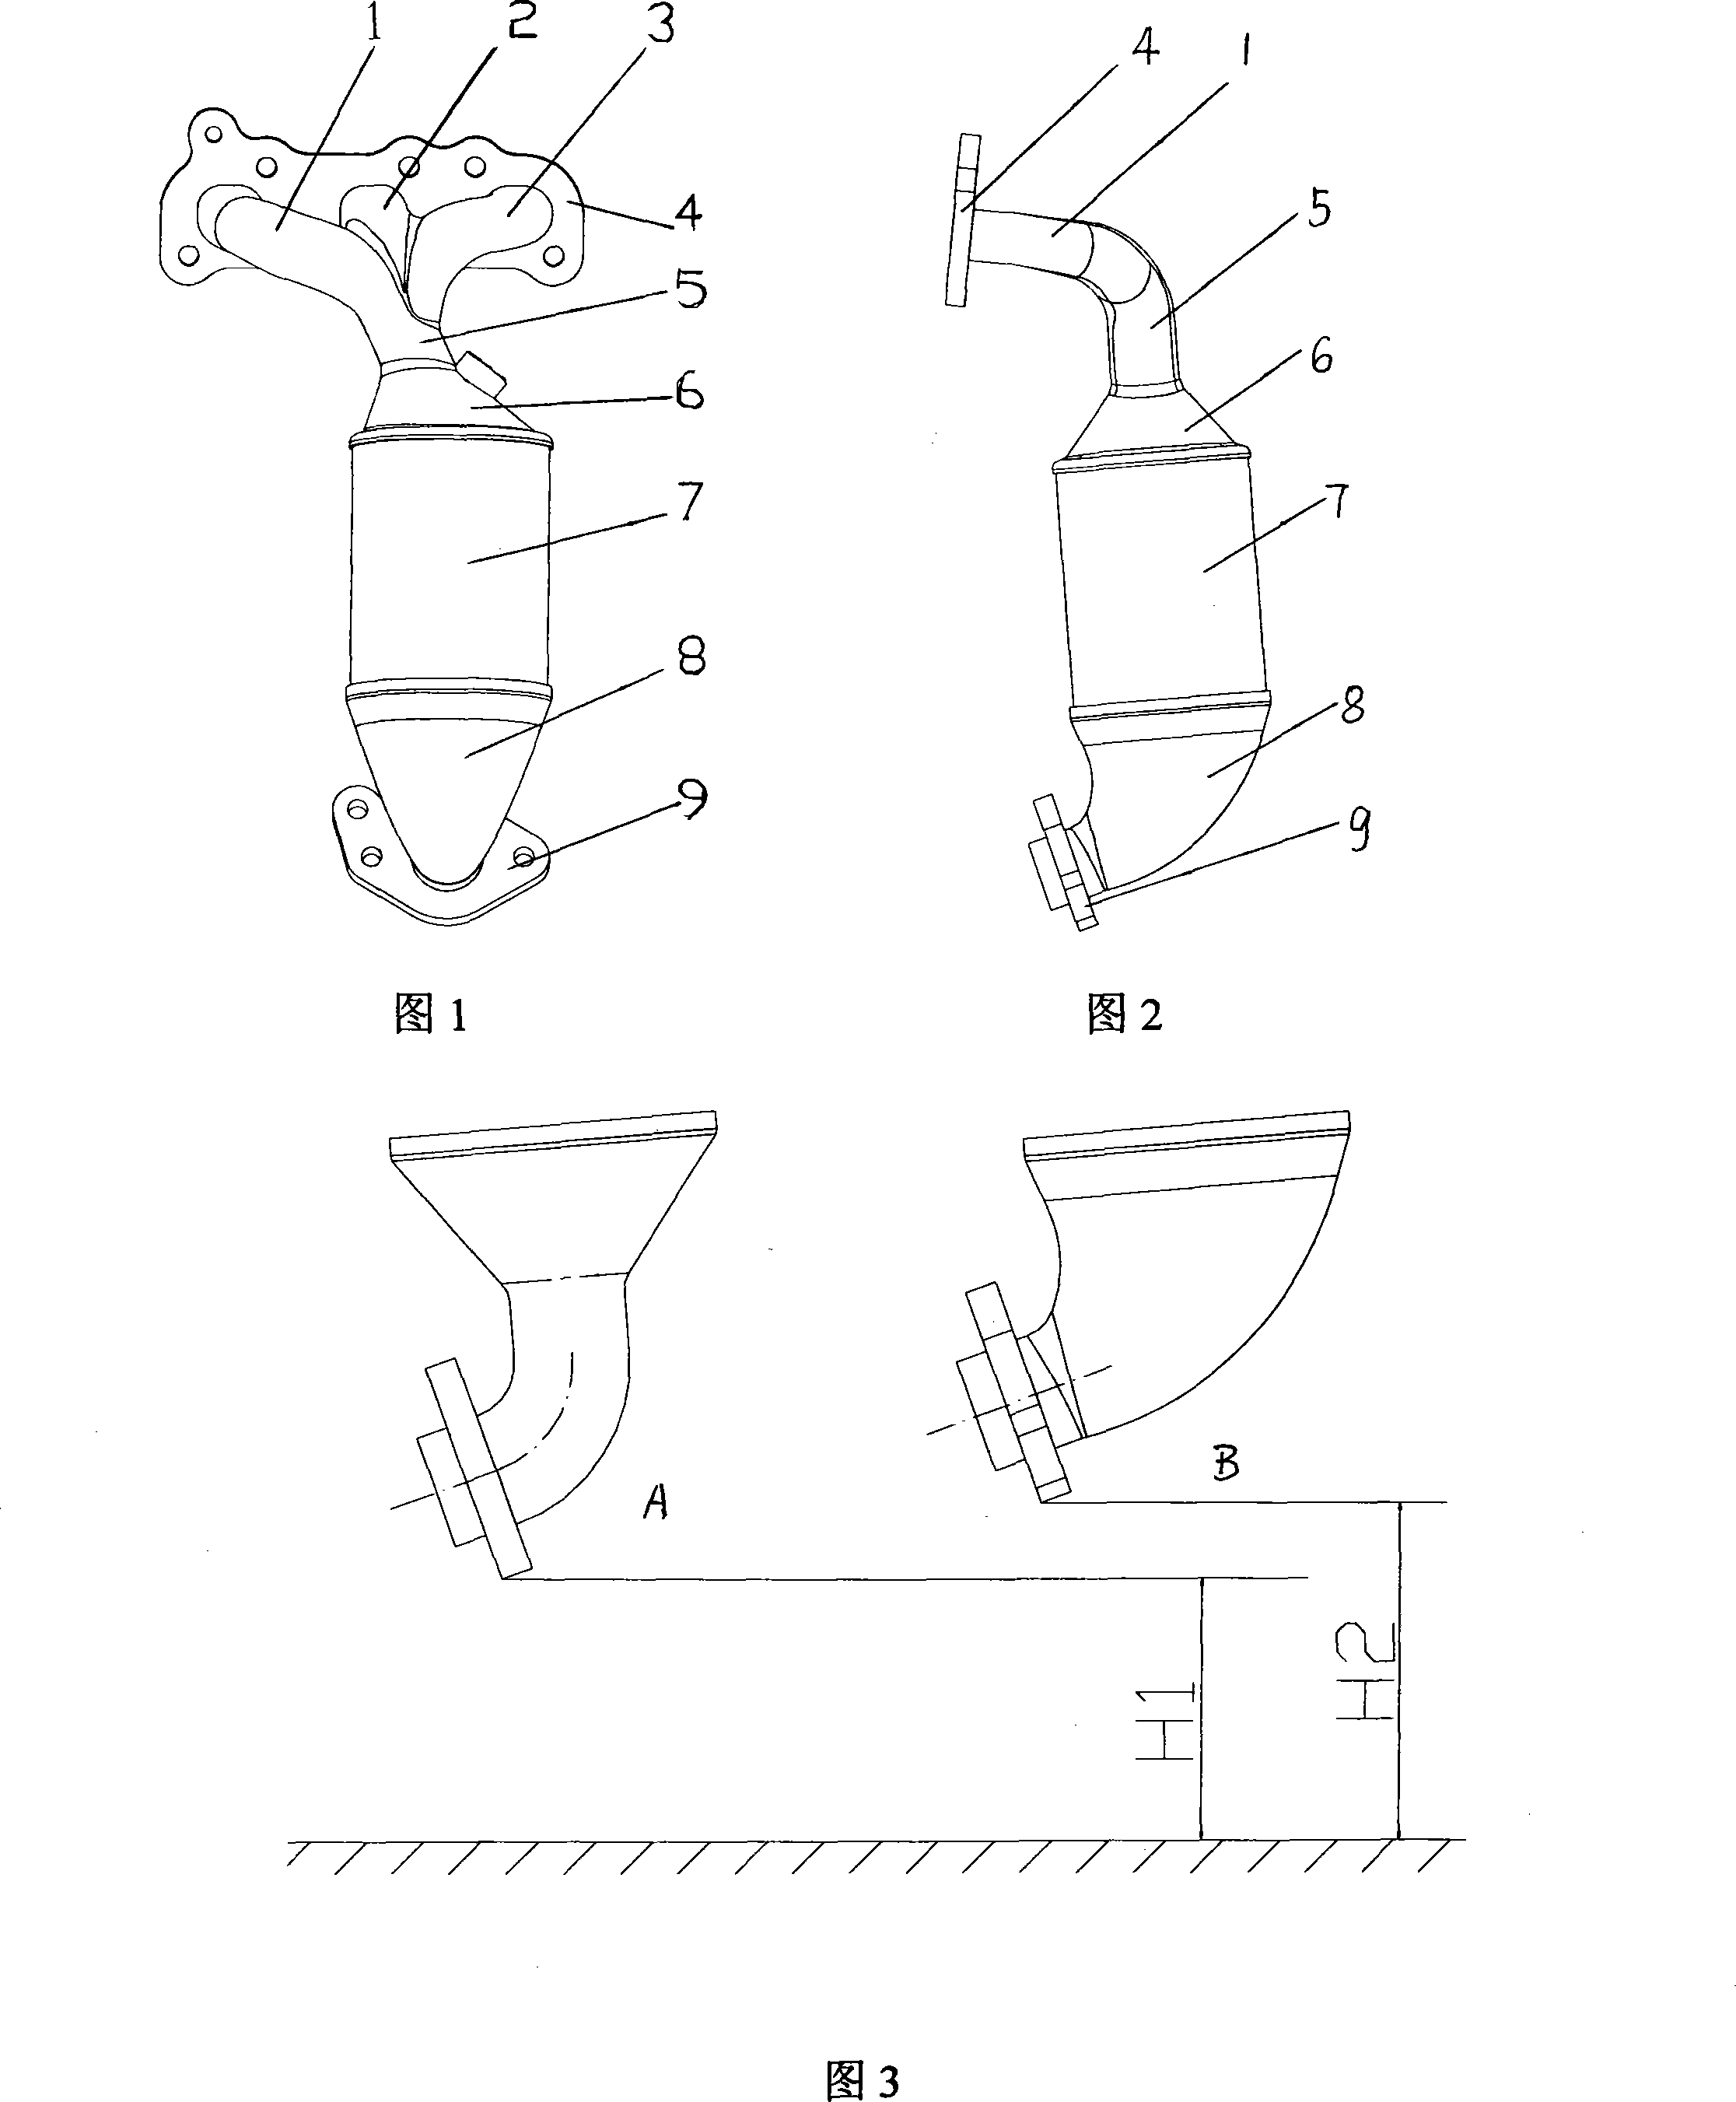 Small displacement engine exhaust manifold assembly structure